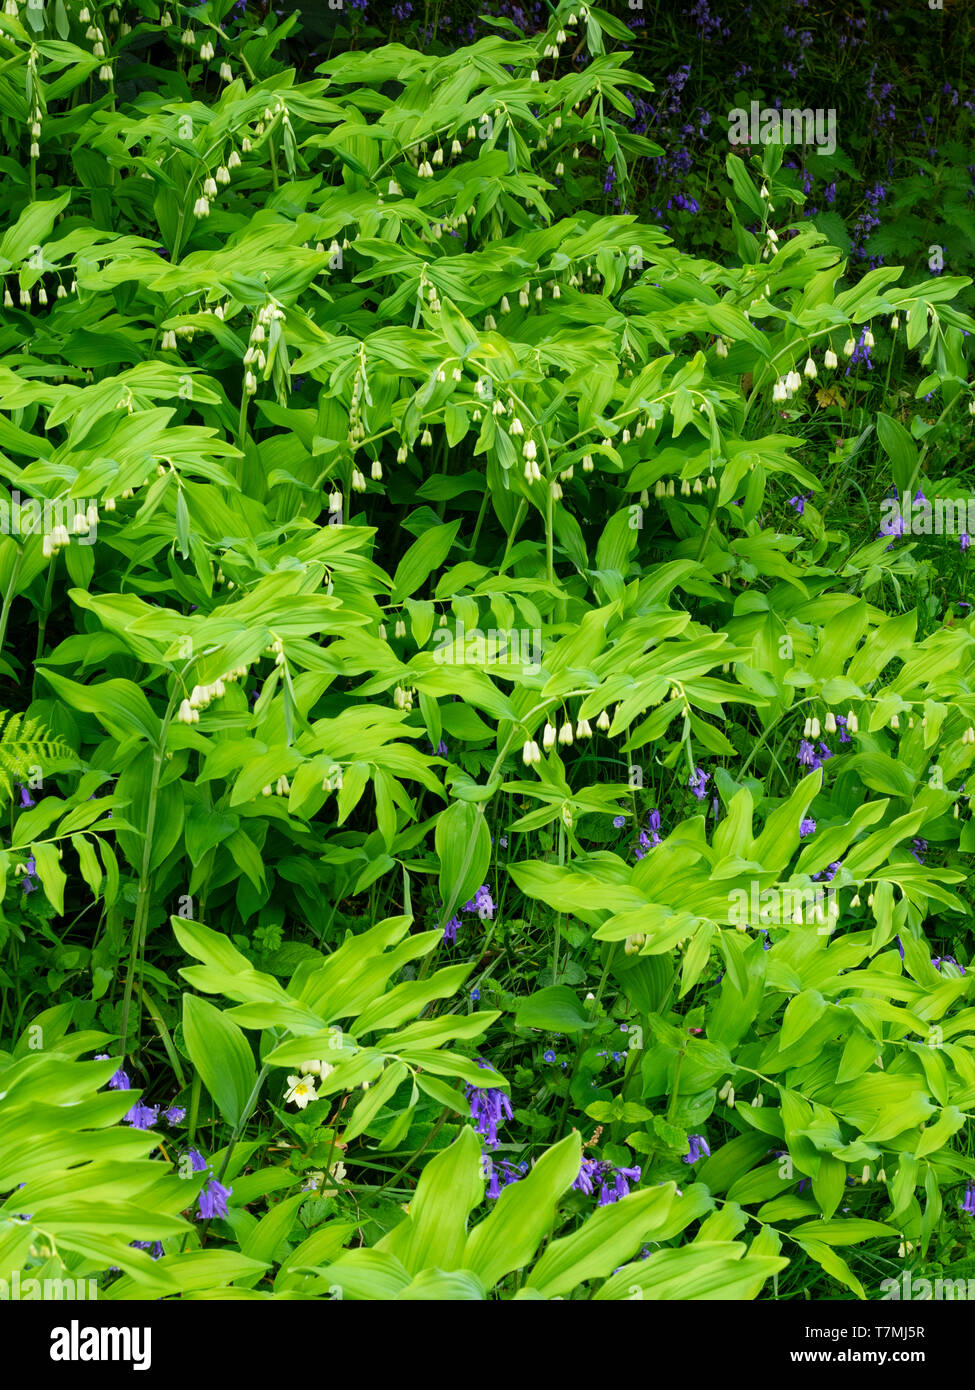 Arching stems and green tipped white bells of the hardy perennial Soloman's Seal, Polygonatum x hybridum Stock Photo